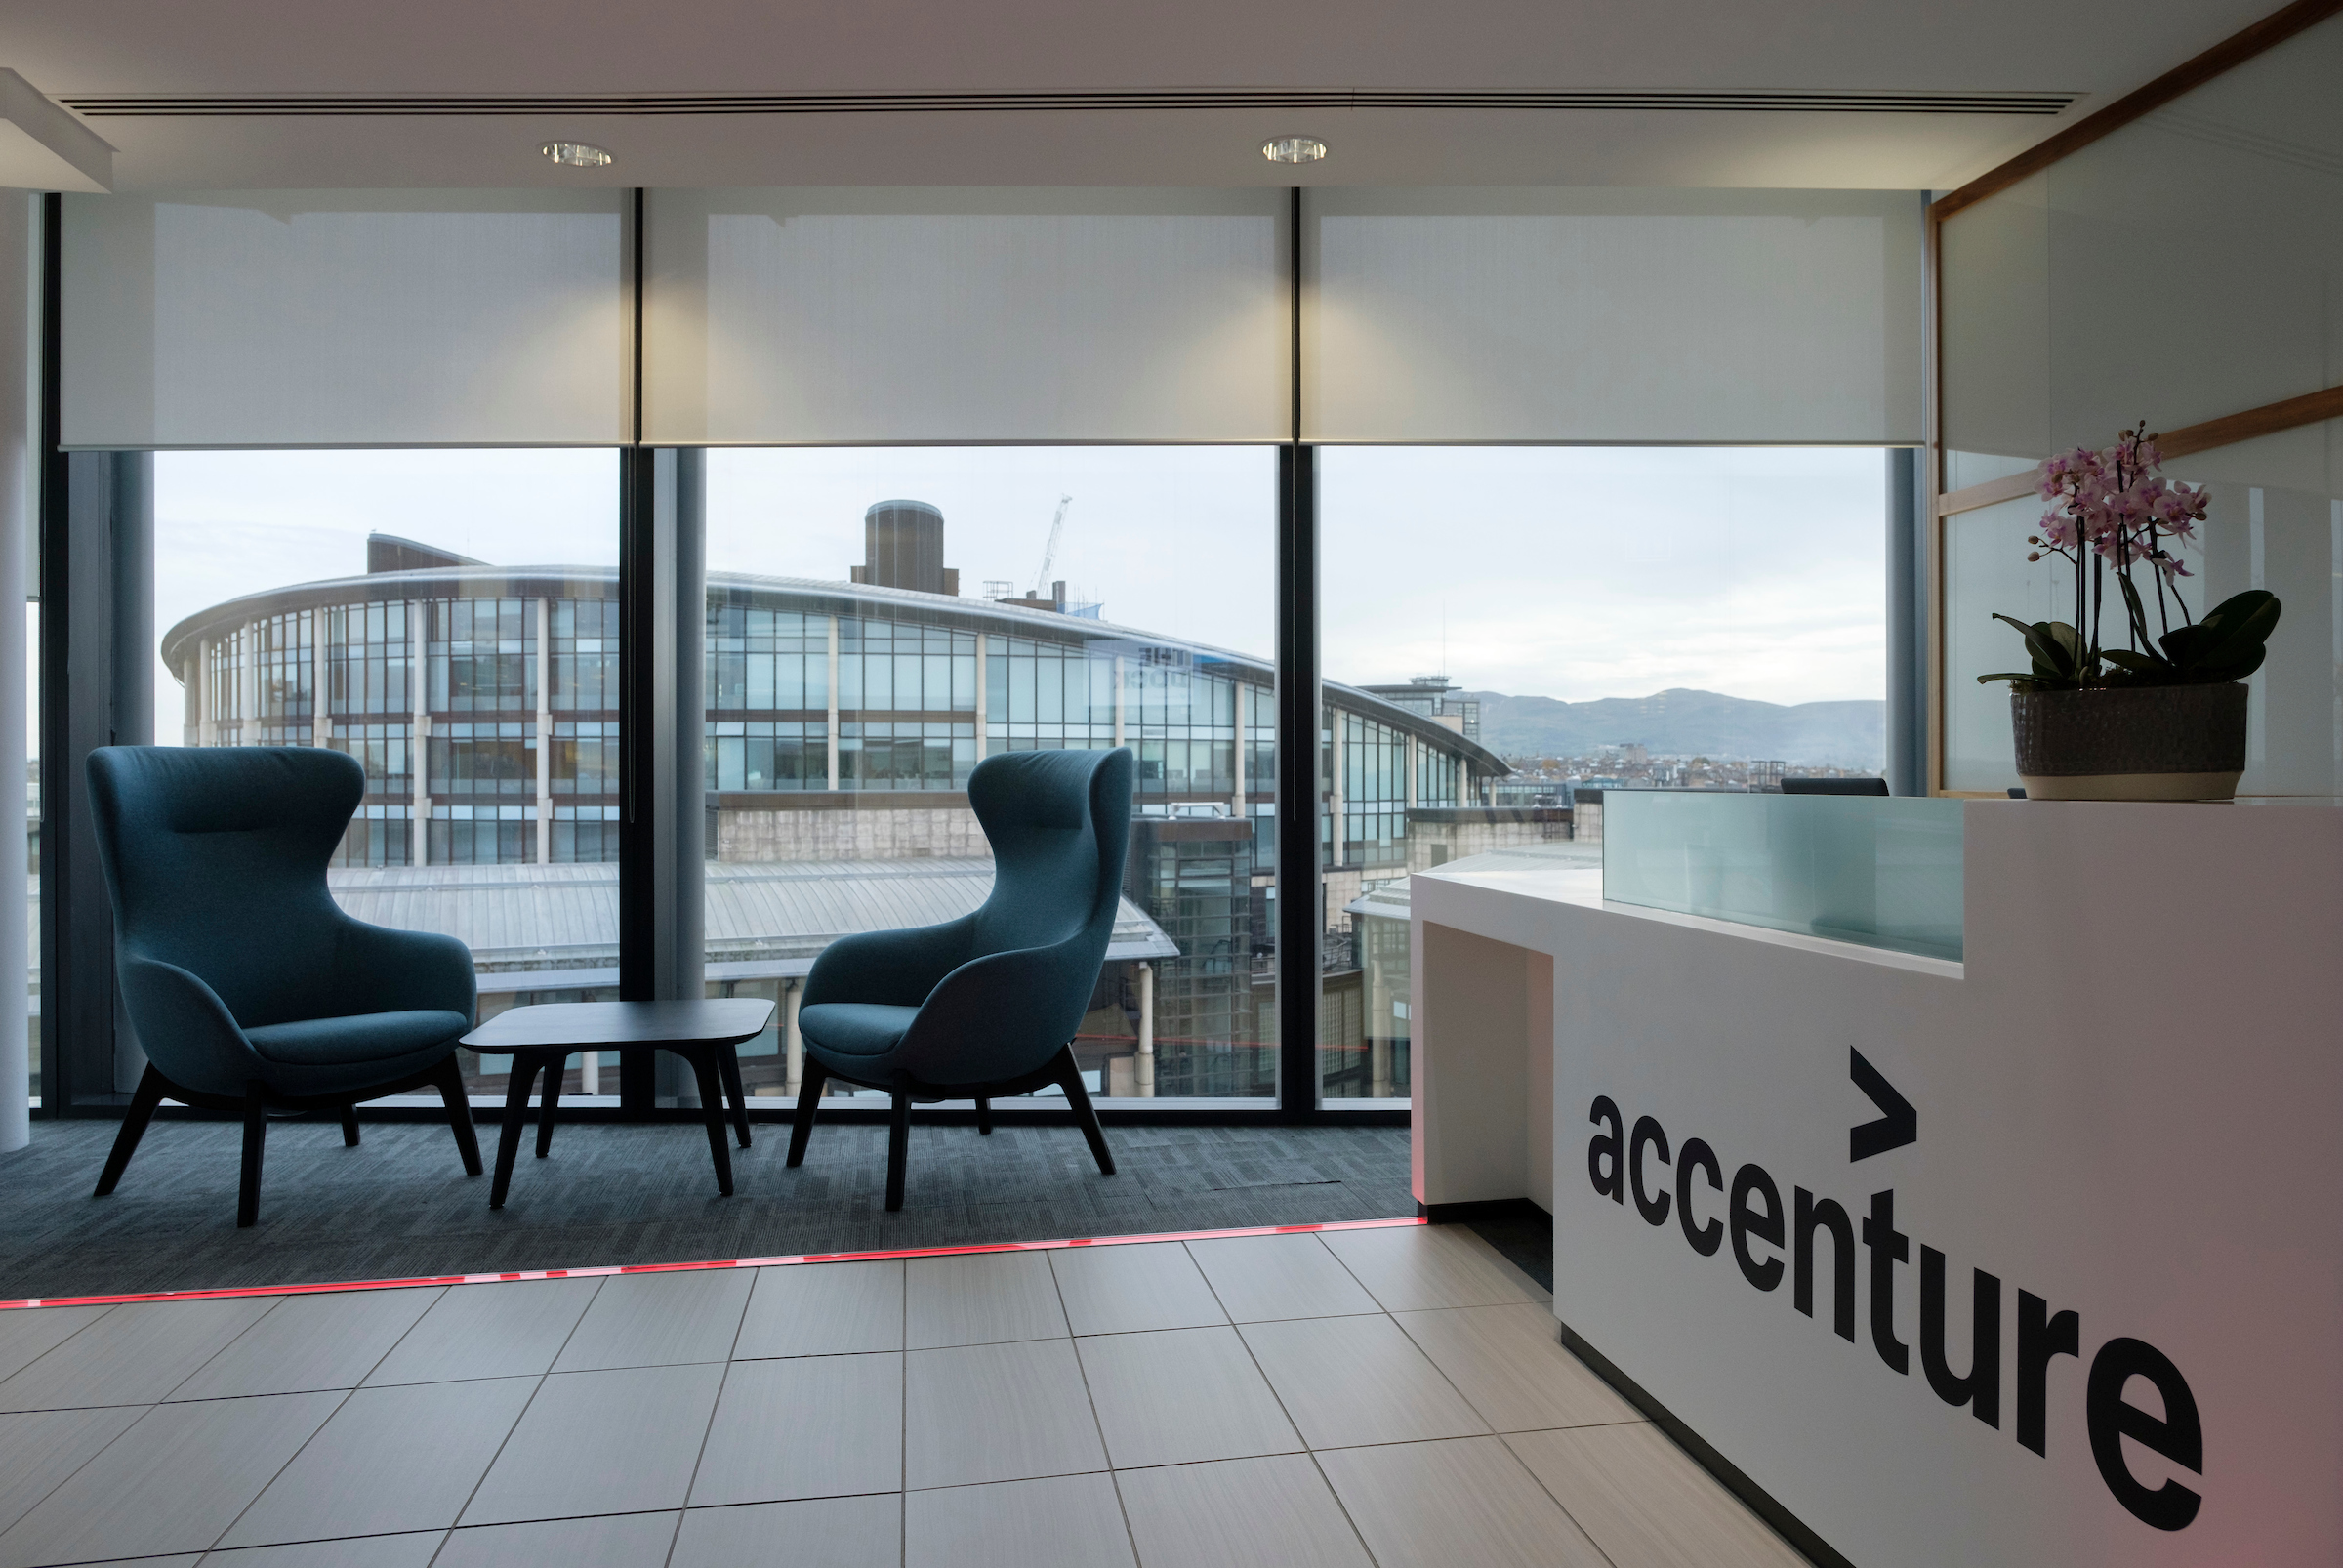 Accenture announces plans to create 3,000 new technology jobs over the next three years